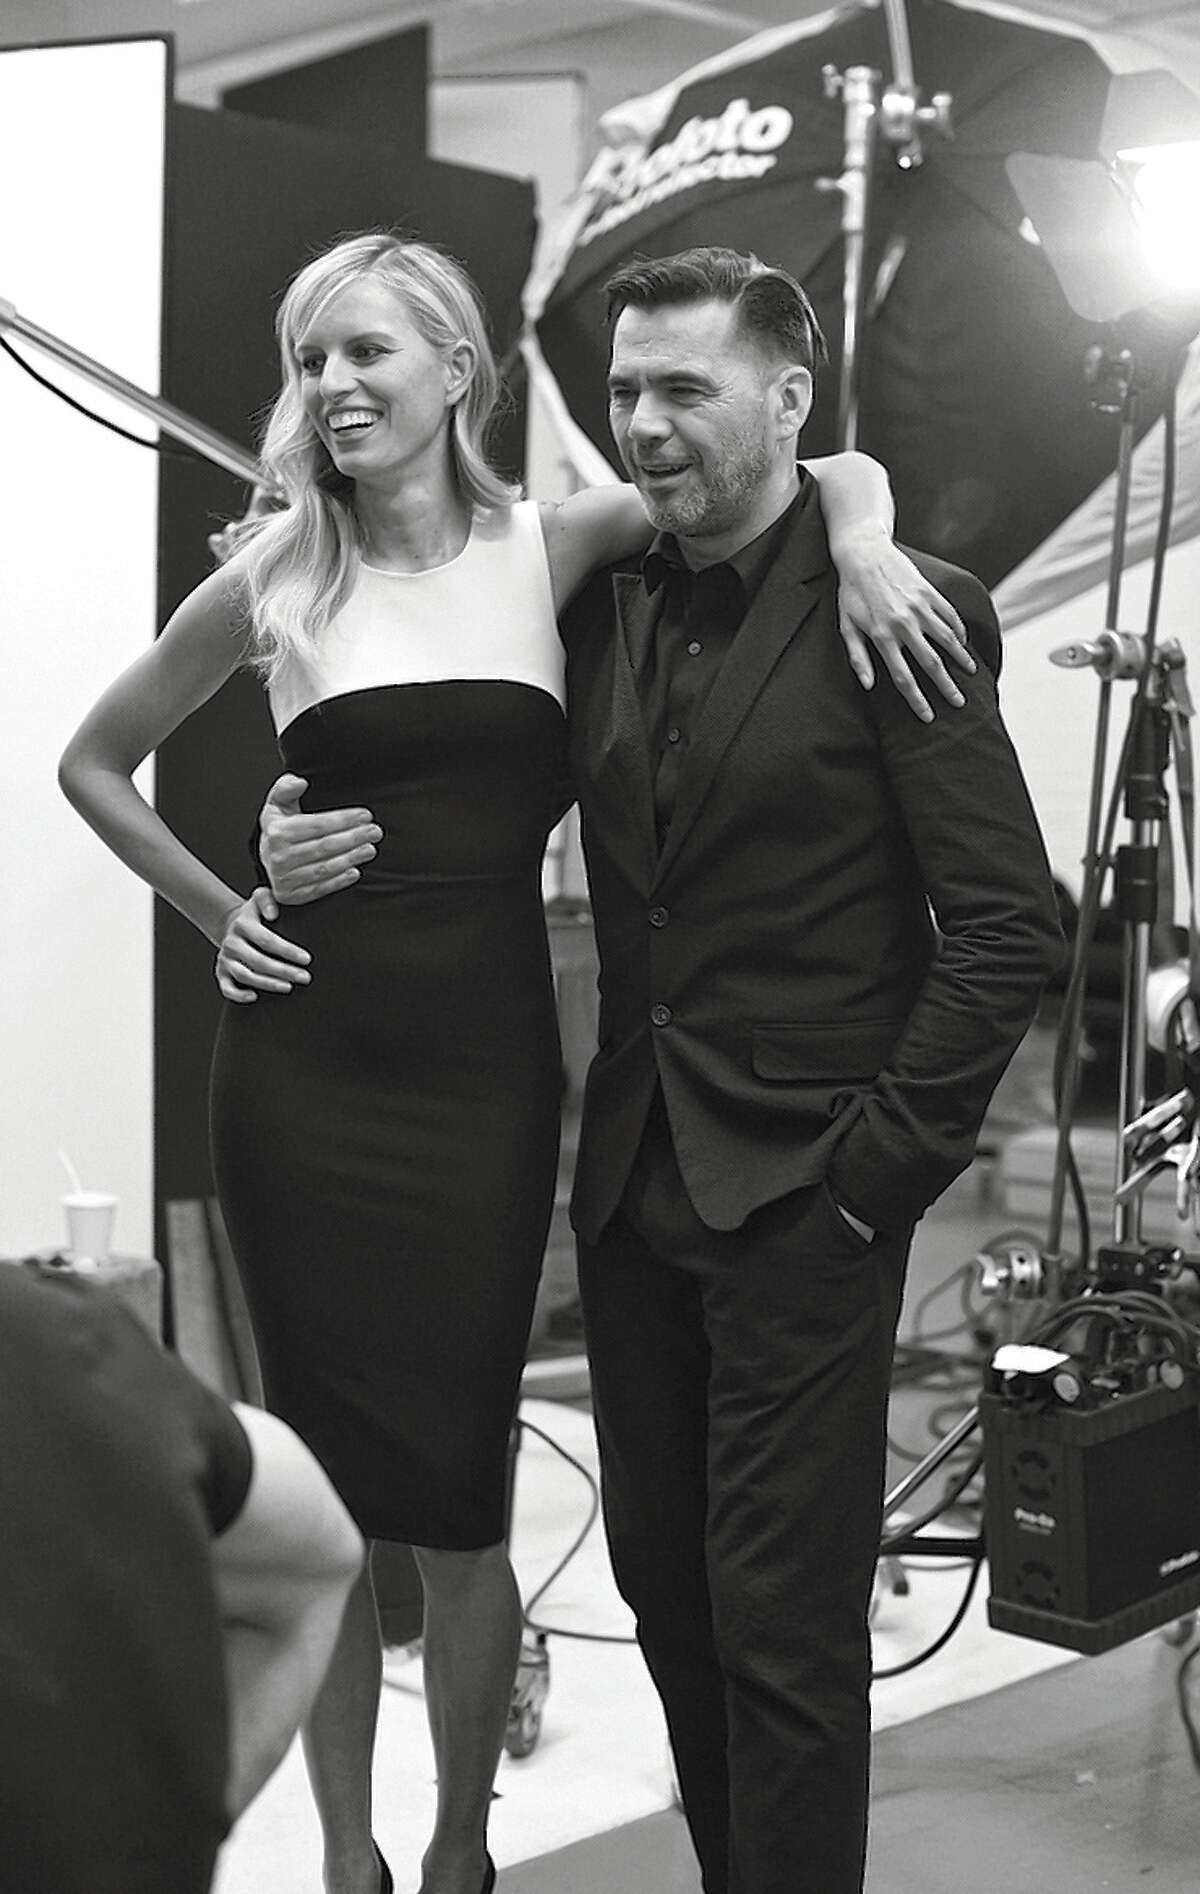 Roland Mouret has created a 30-piece capsule collection for Banana Republic.